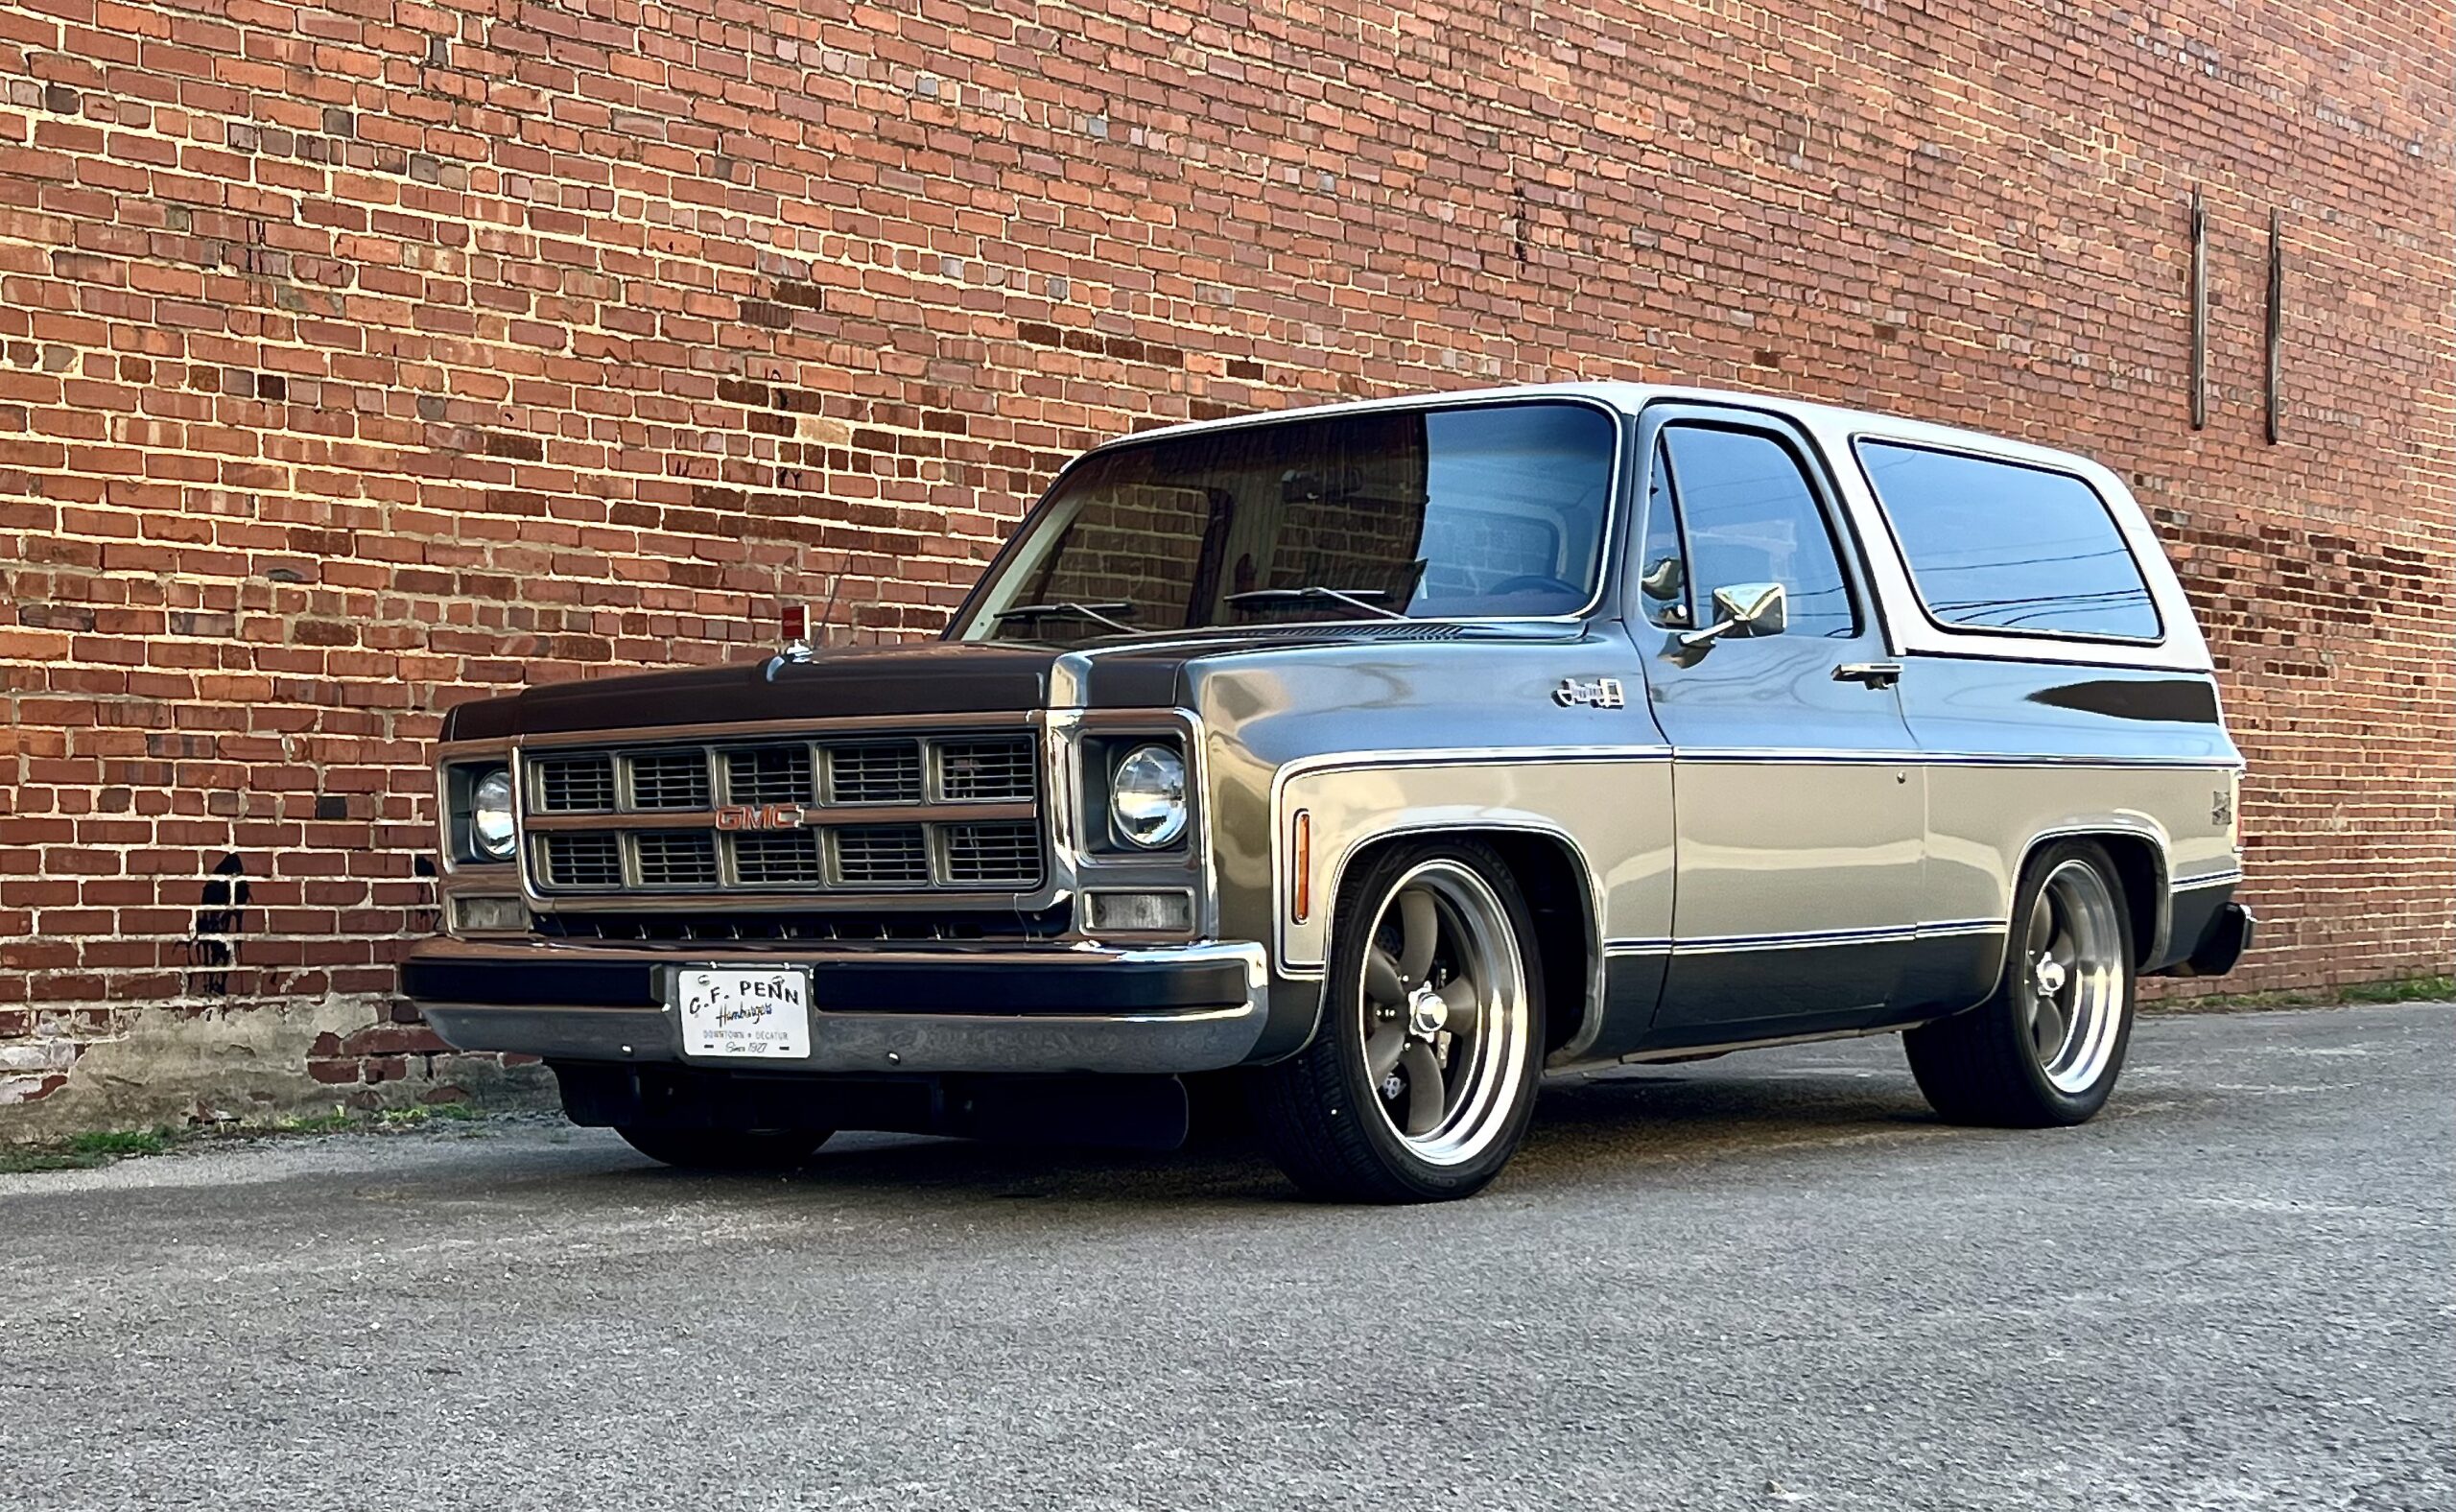 1979 GMC Jimmy High Sierra, Built By Greening Auto Company – SOLD